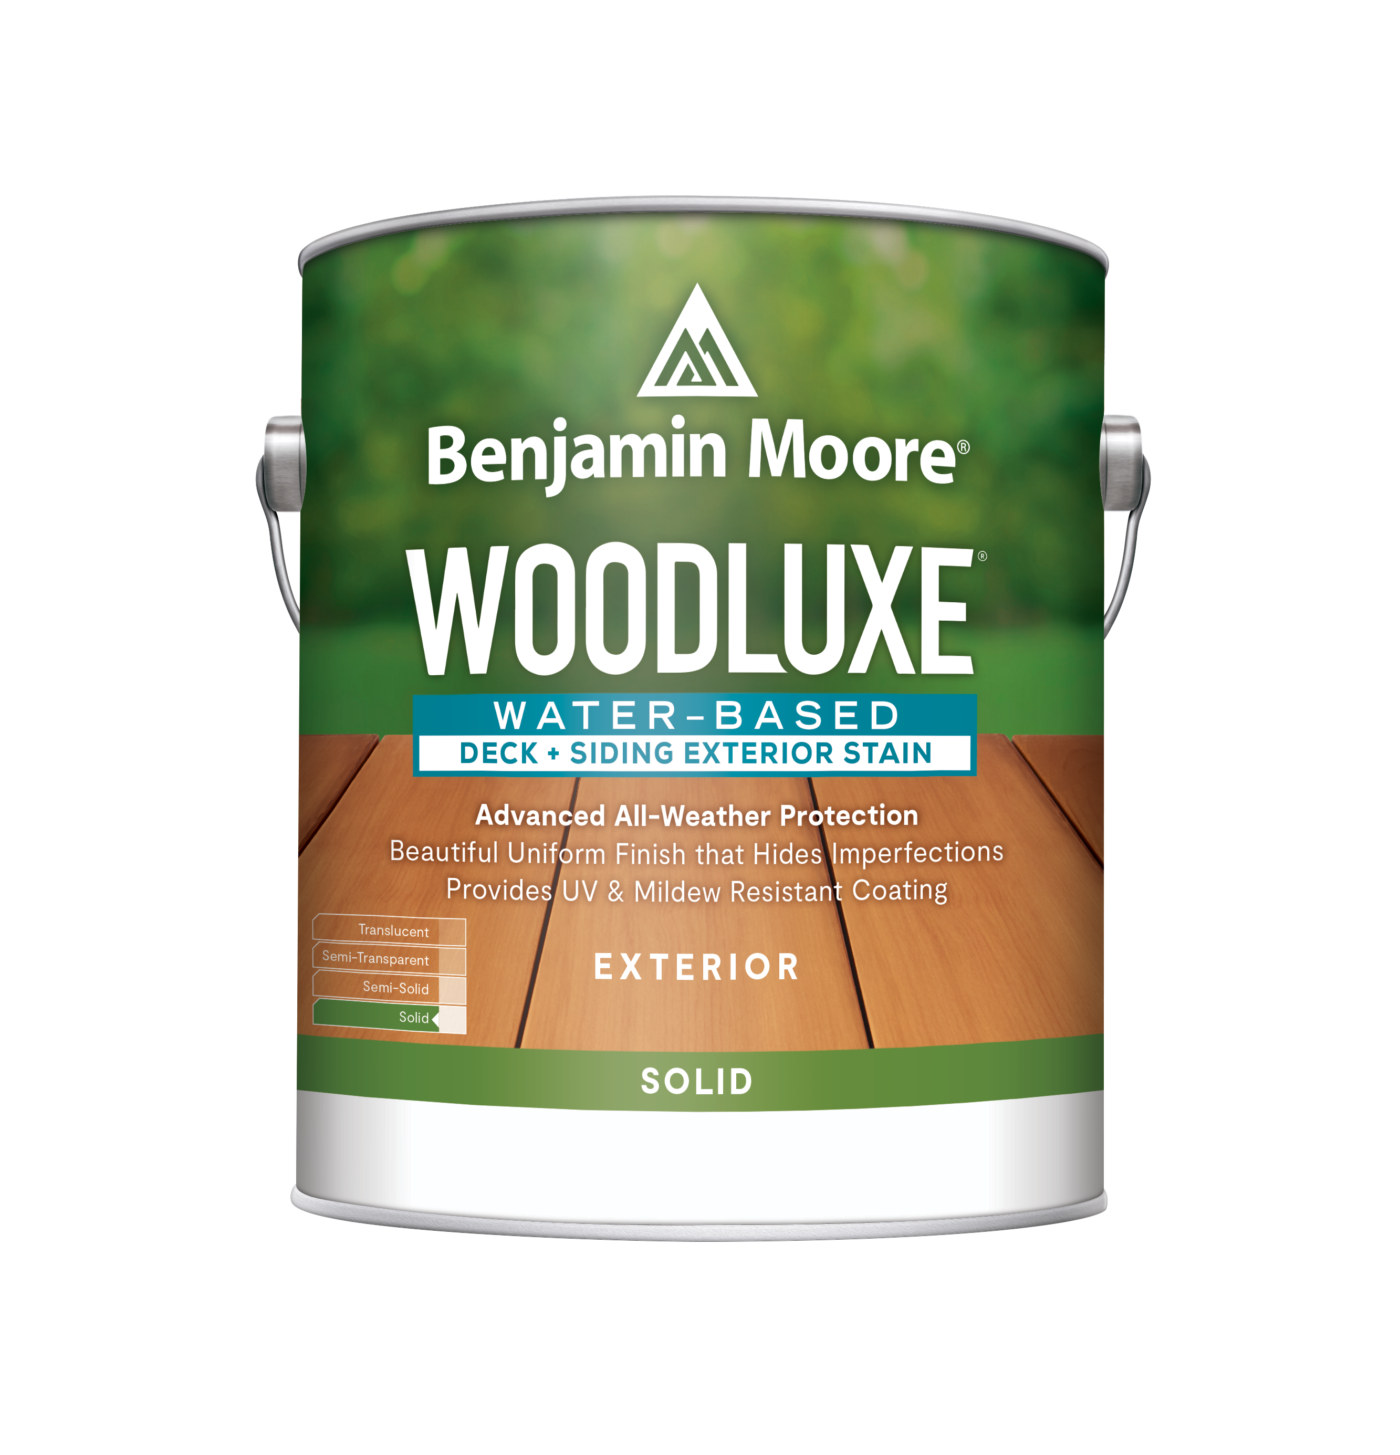 woodluxe by benjamin moore can cut